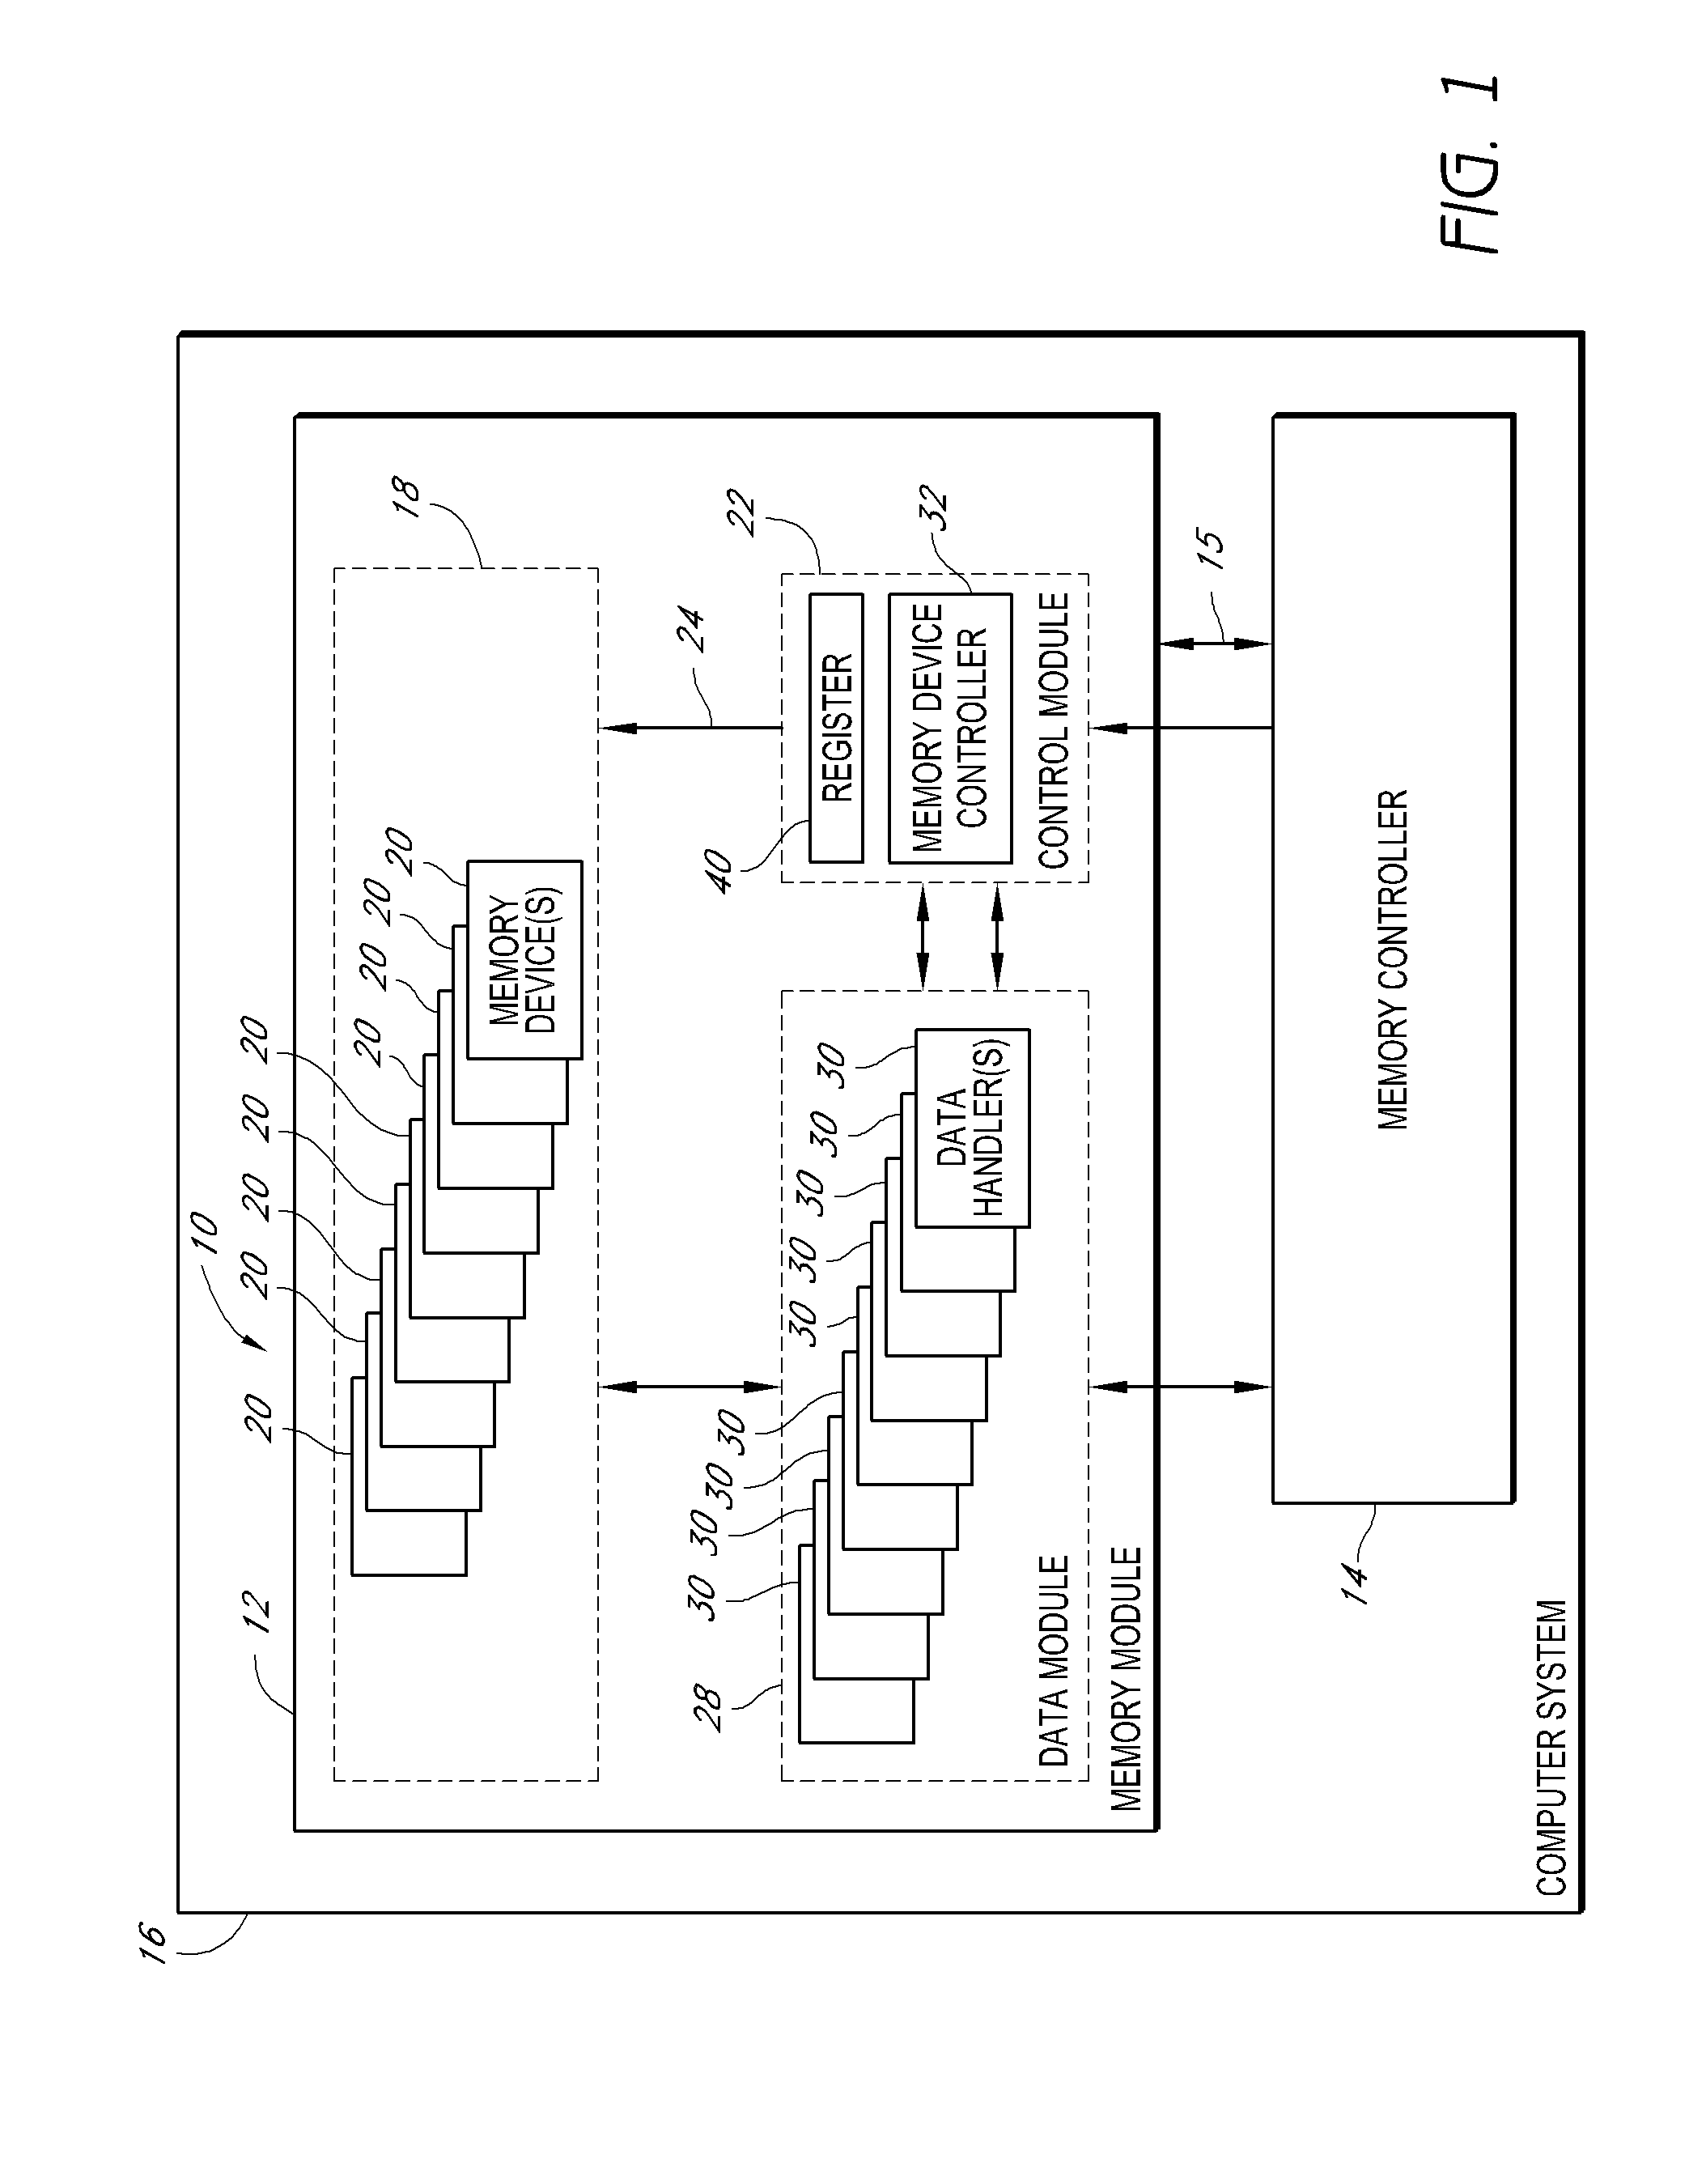 Memory board with self-testing capability